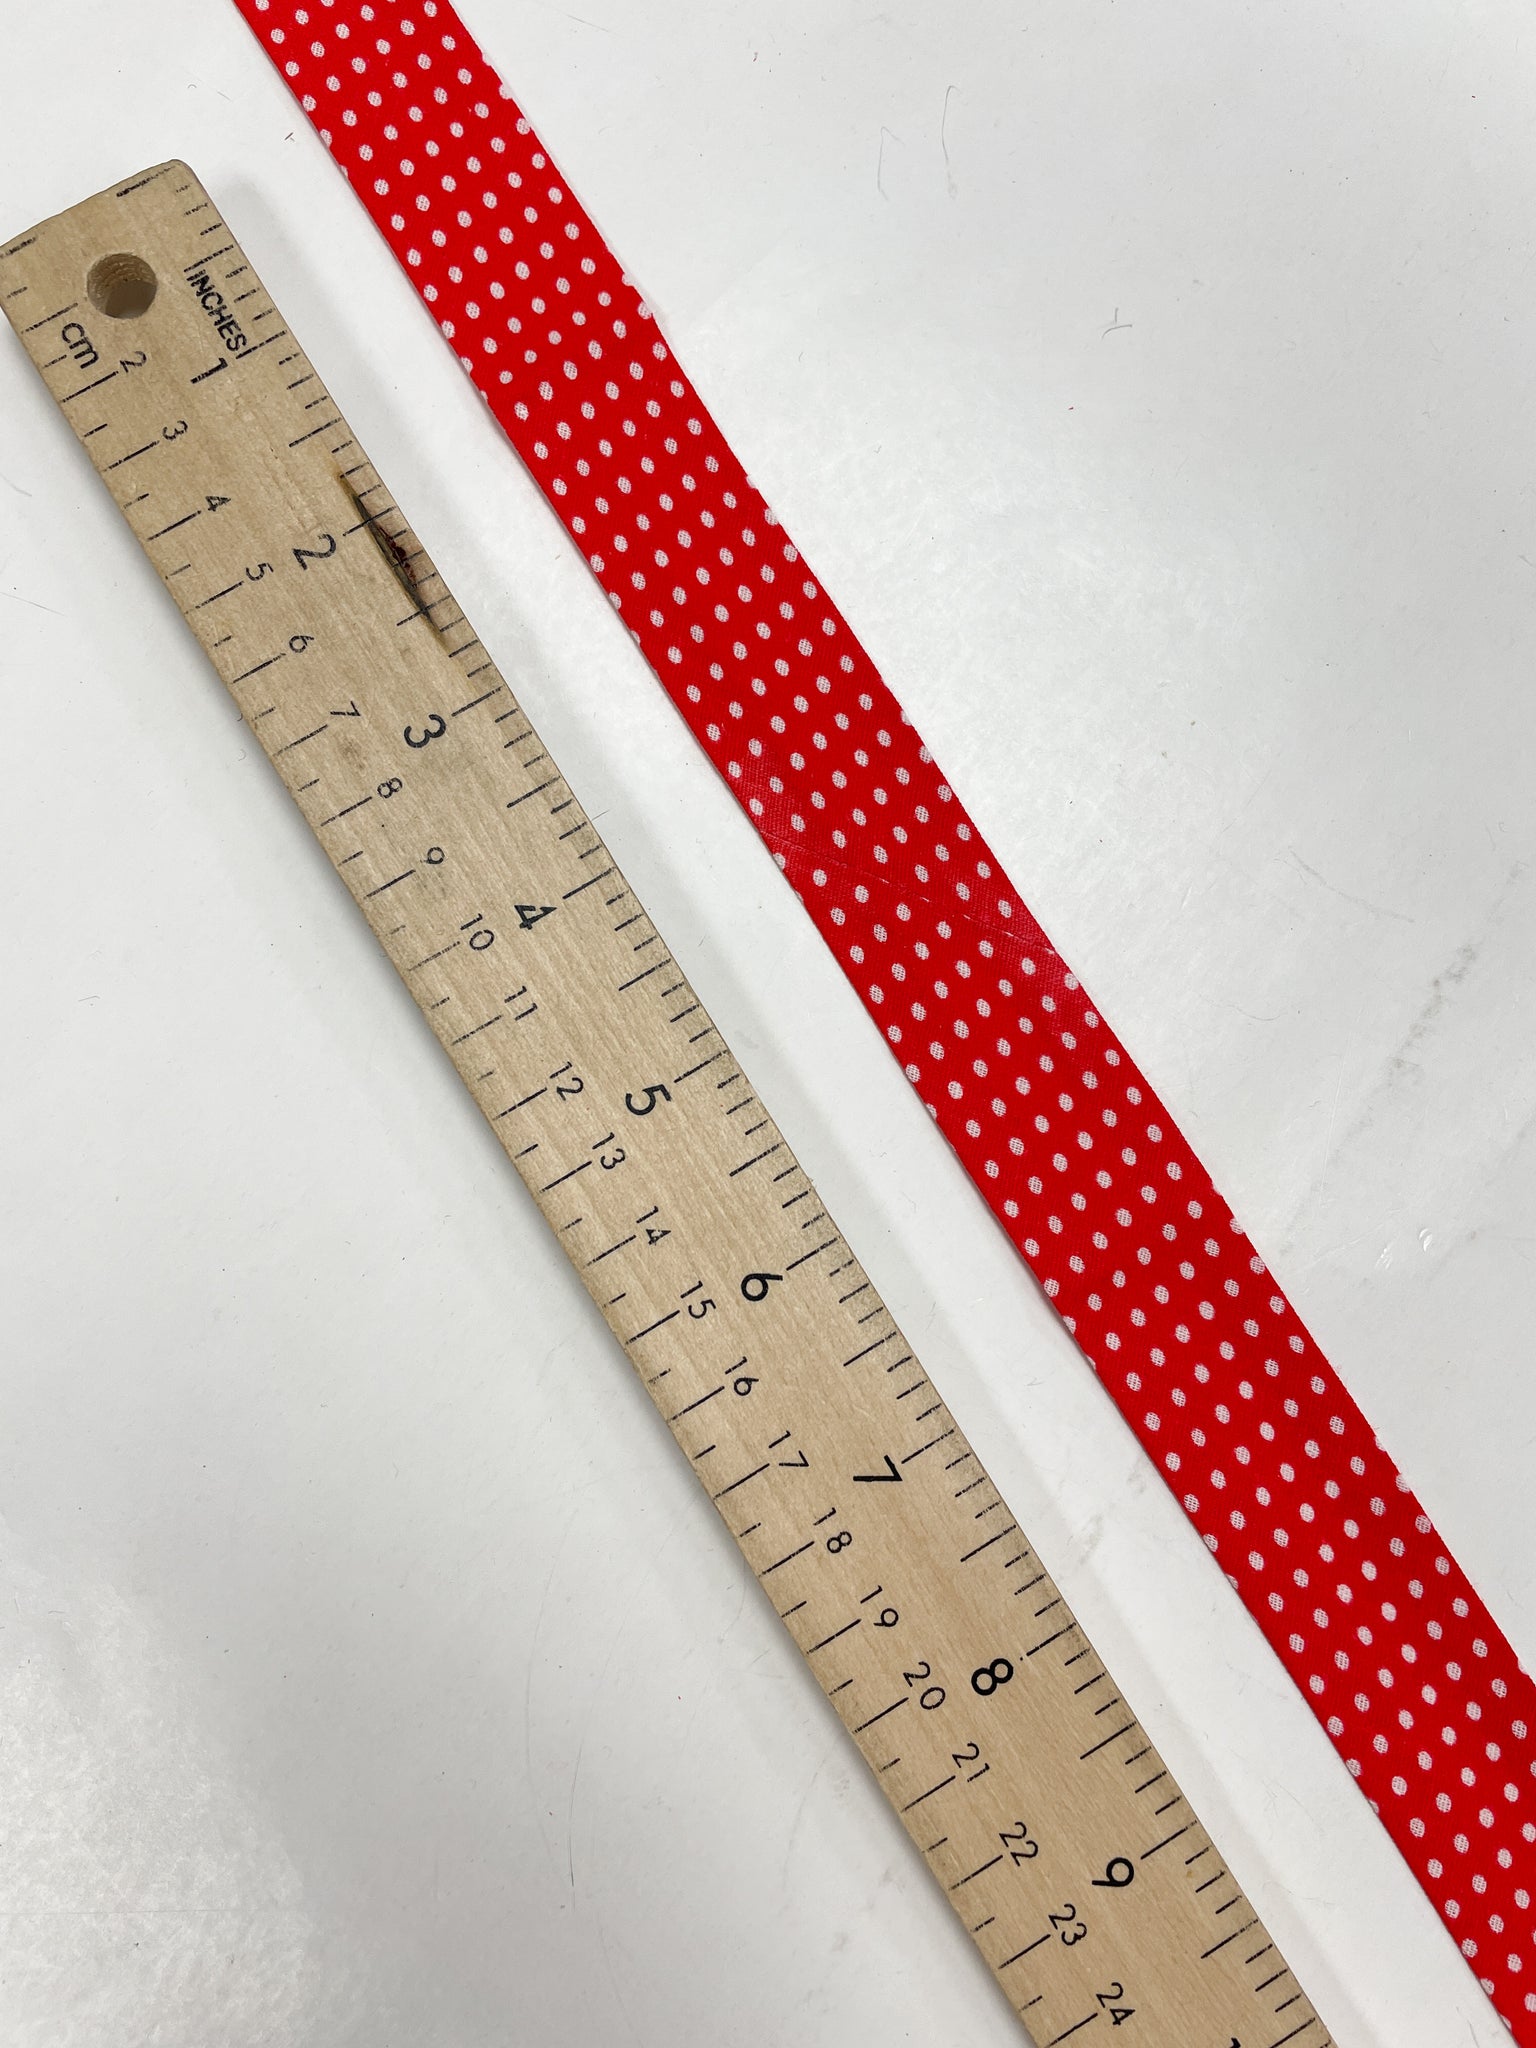 2 5/8 YD Cotton Blend Bias Tape - Red with White Dots